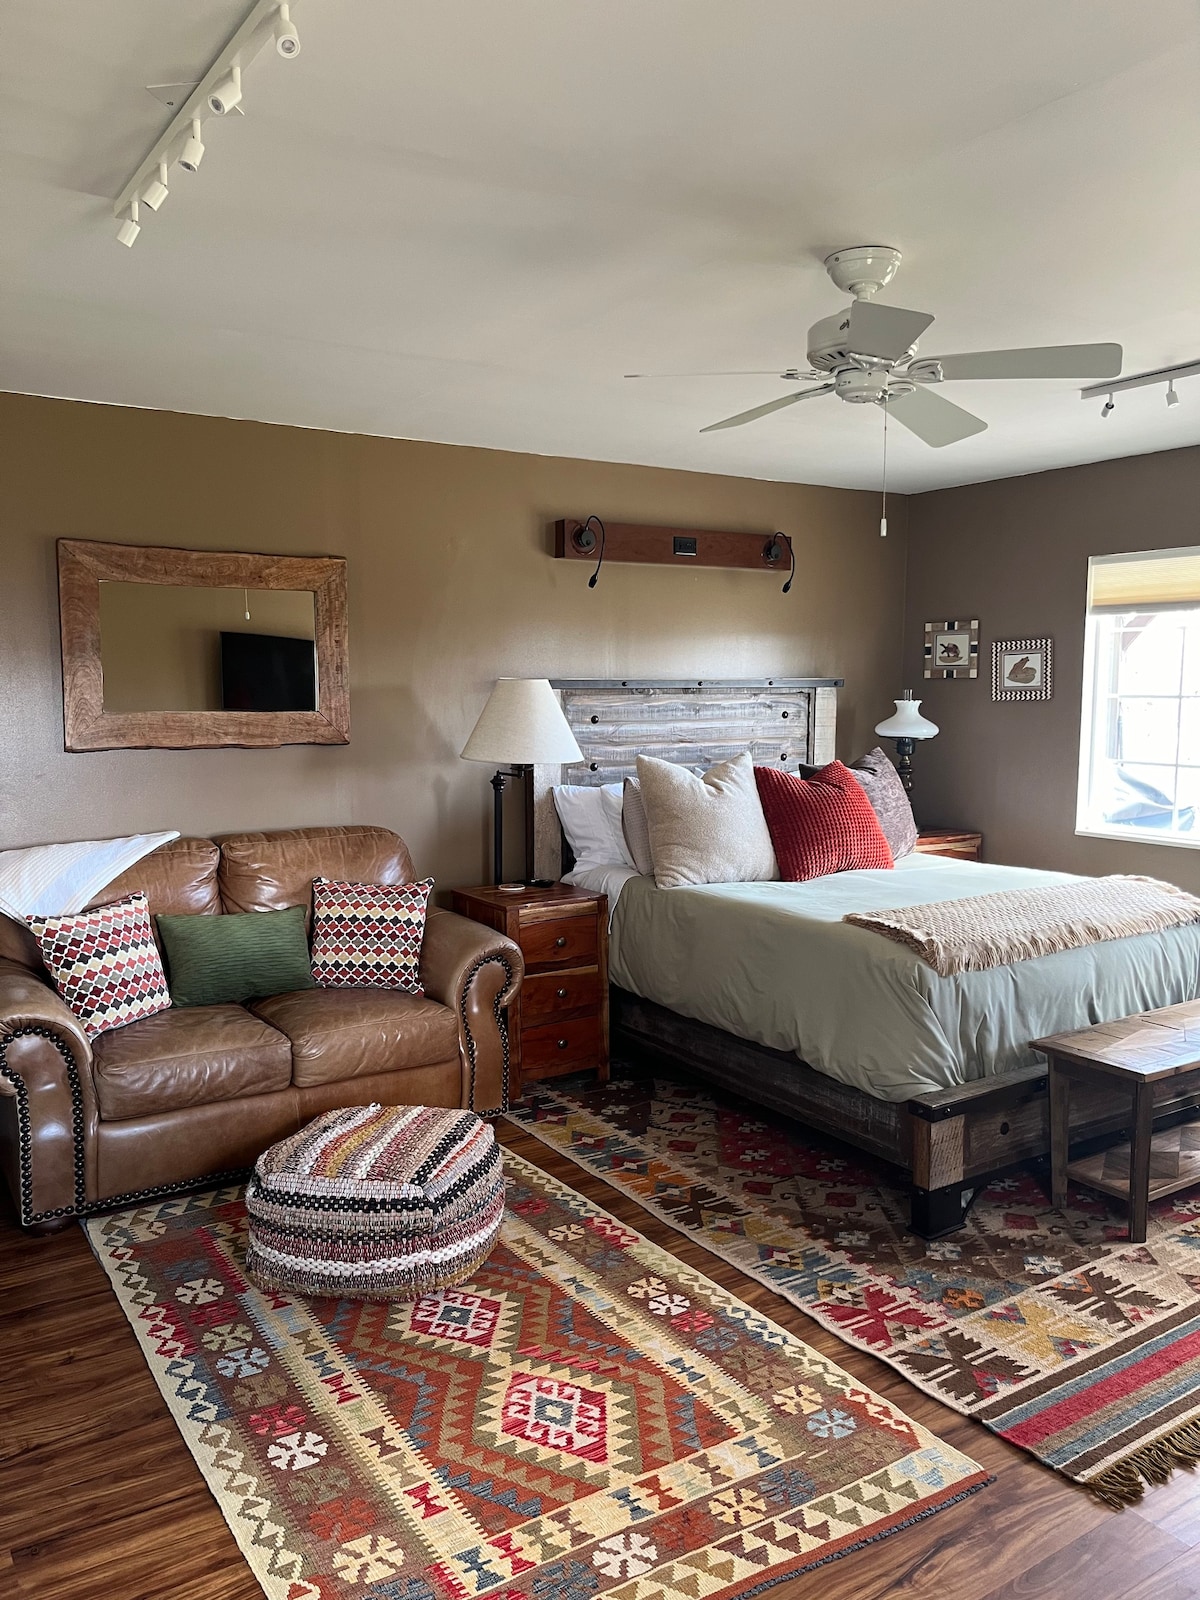 Cozy guesthome w/hot tub access, near Capitol Reef